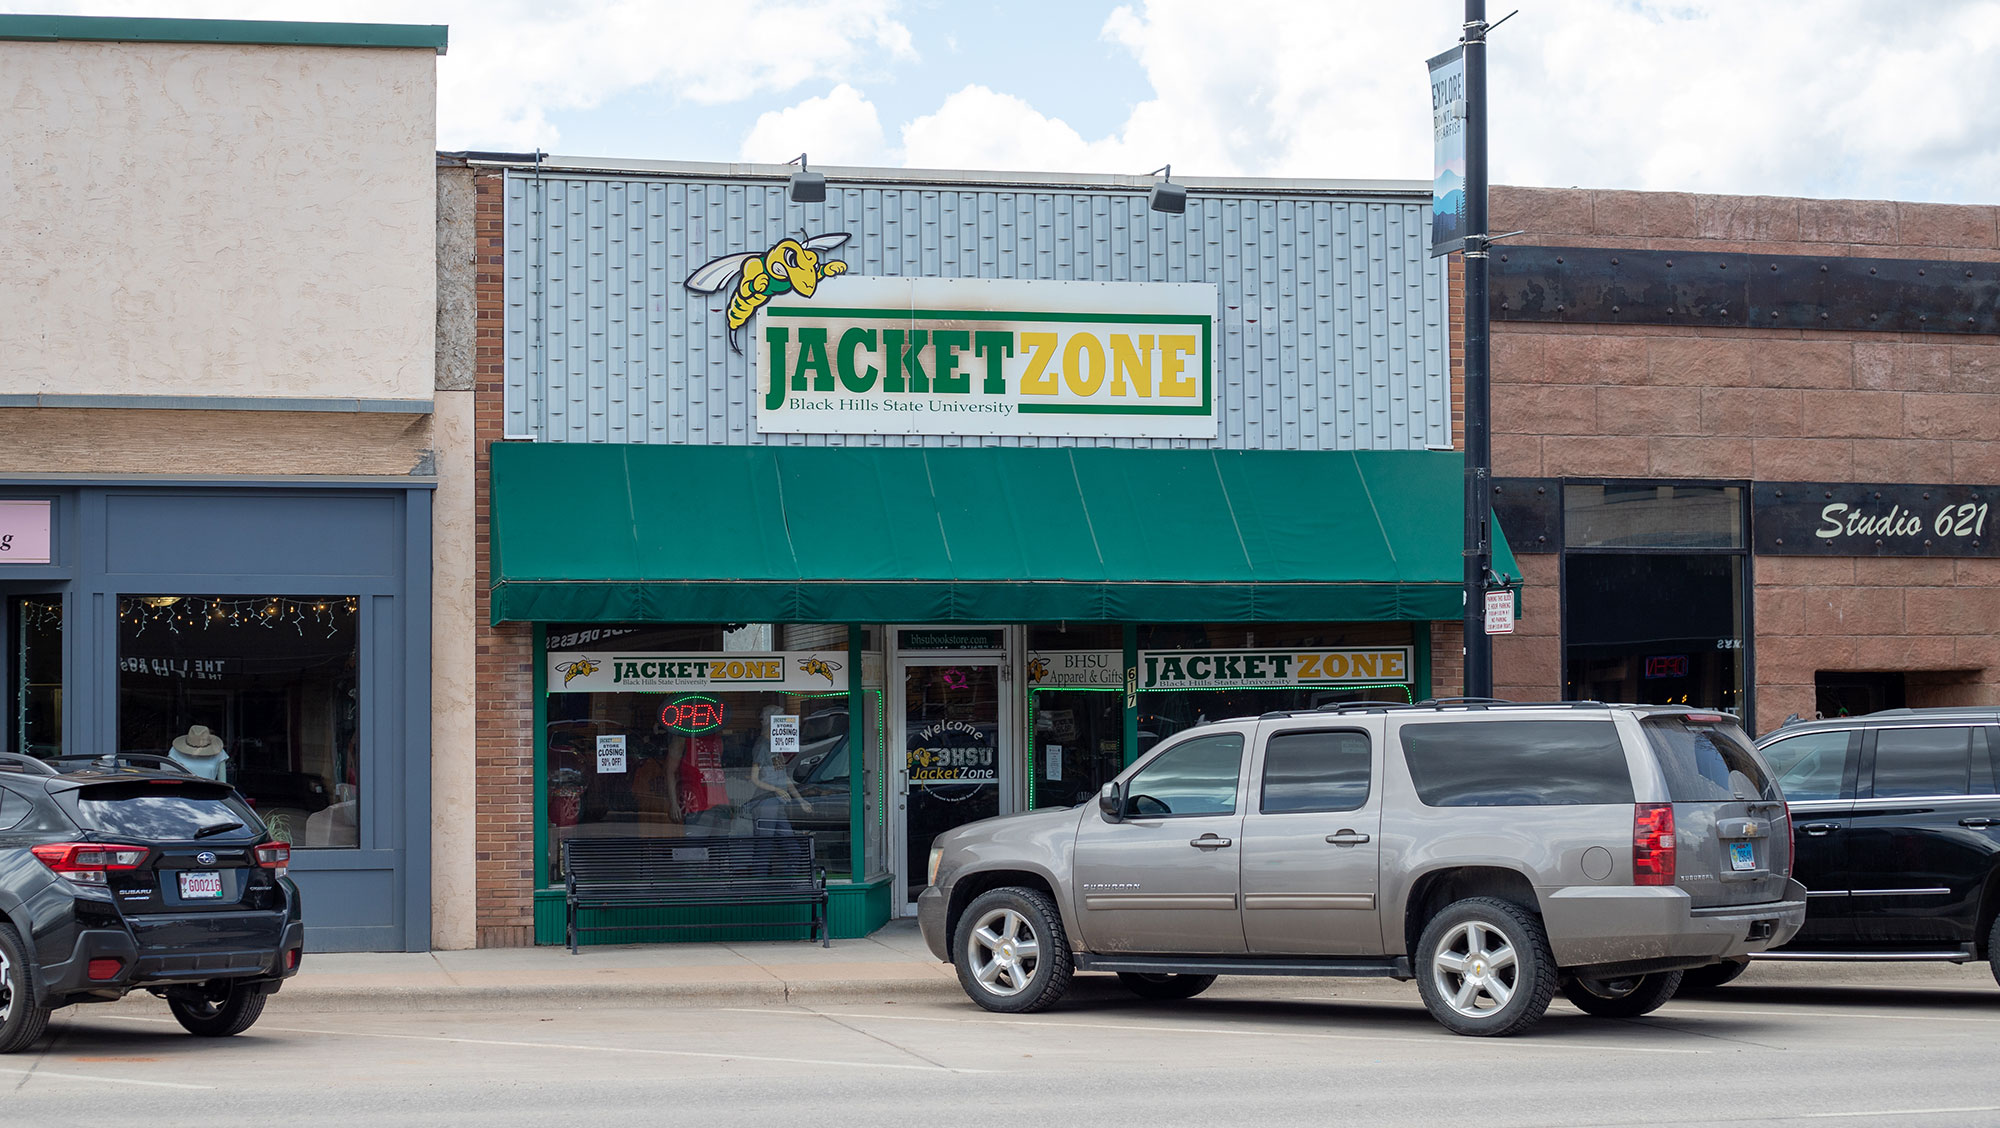 Image of the front of the Jacket Zone located on Main Street in Spearfish, SD